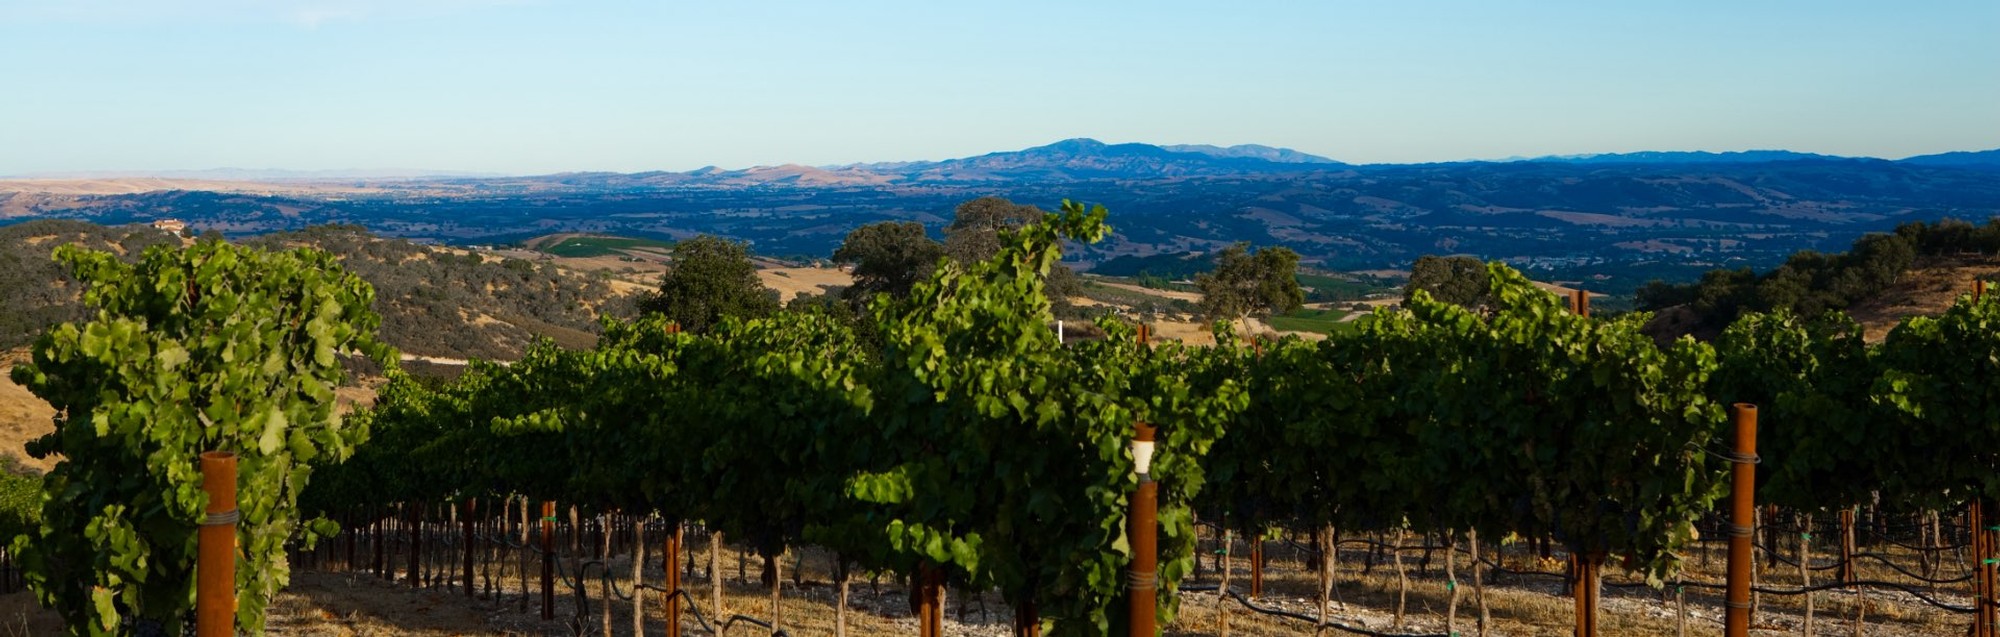 Calcareous Vineyard rows of grape vines in Paso Robles, CA